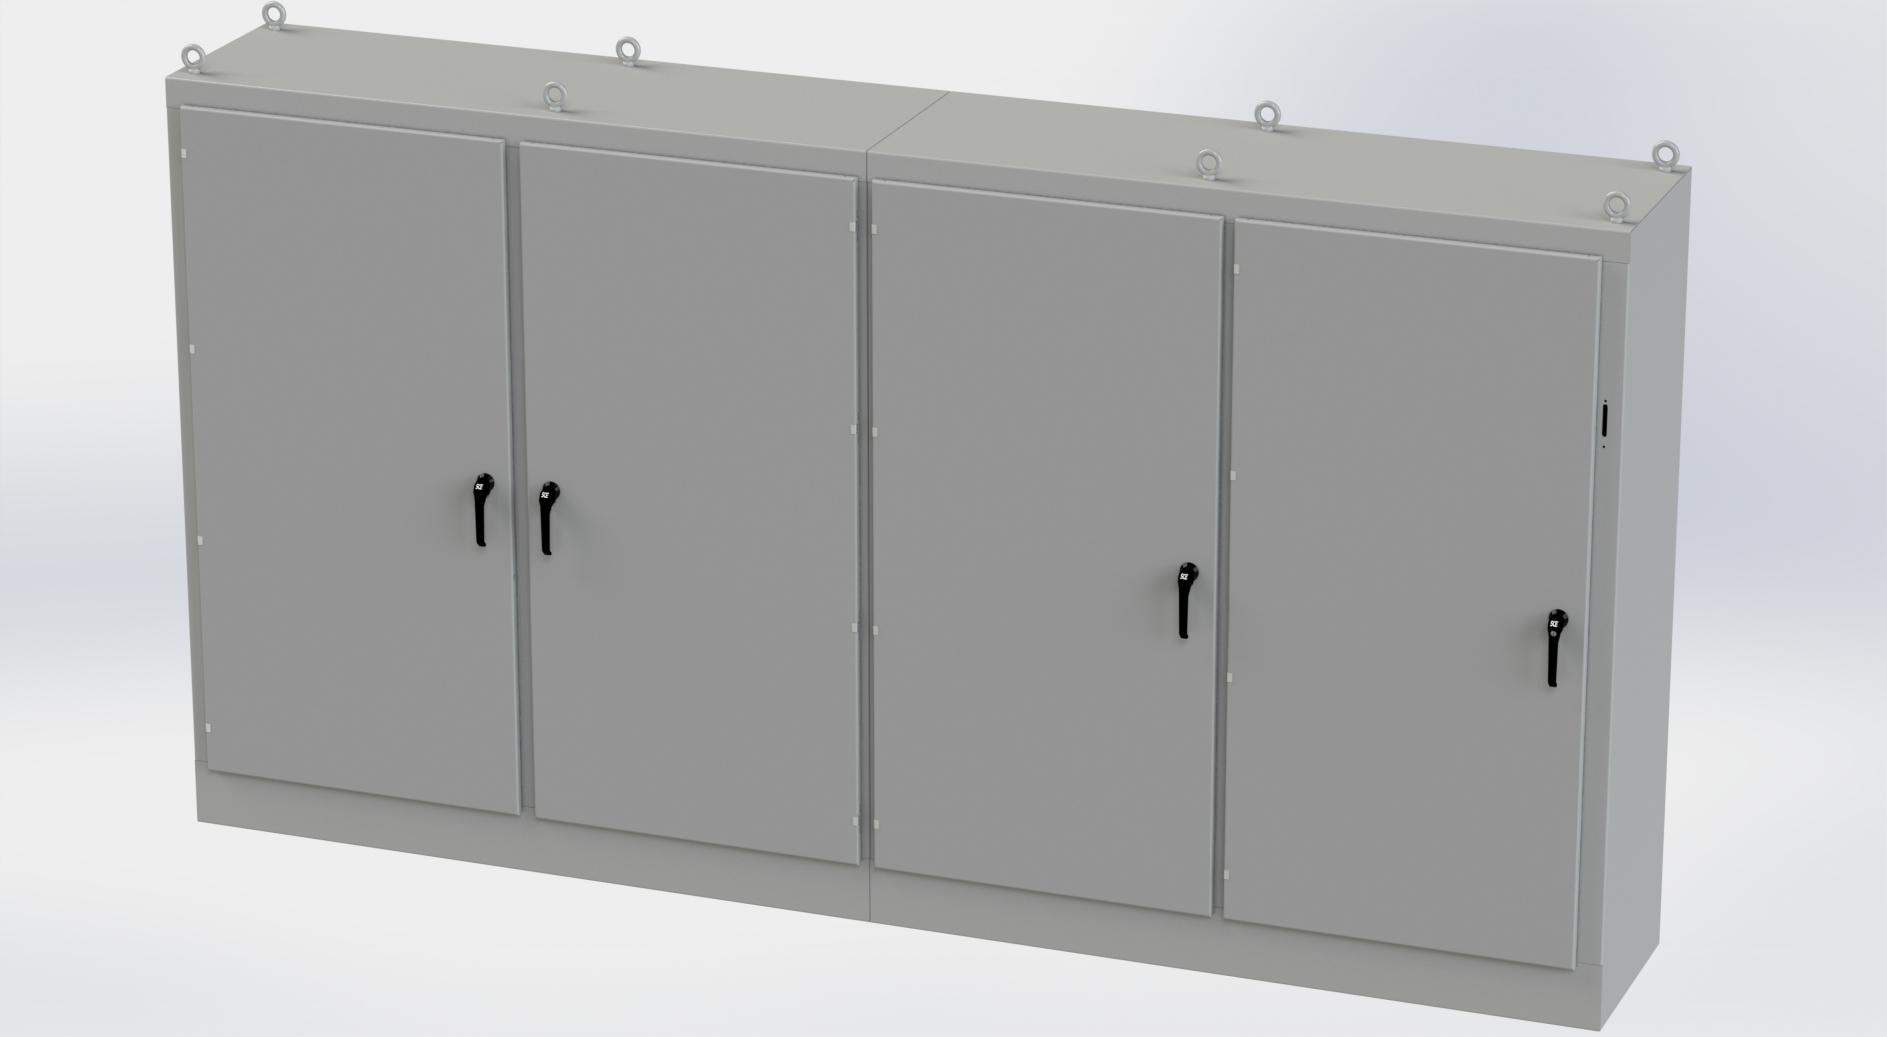 Saginaw Control SCE-84XM4EW24 4DR XM Enclosure, Height:84.00", Width:157.50", Depth:24.00", ANSI-61 gray powder coating inside and out. Subpanels are powder coated white.